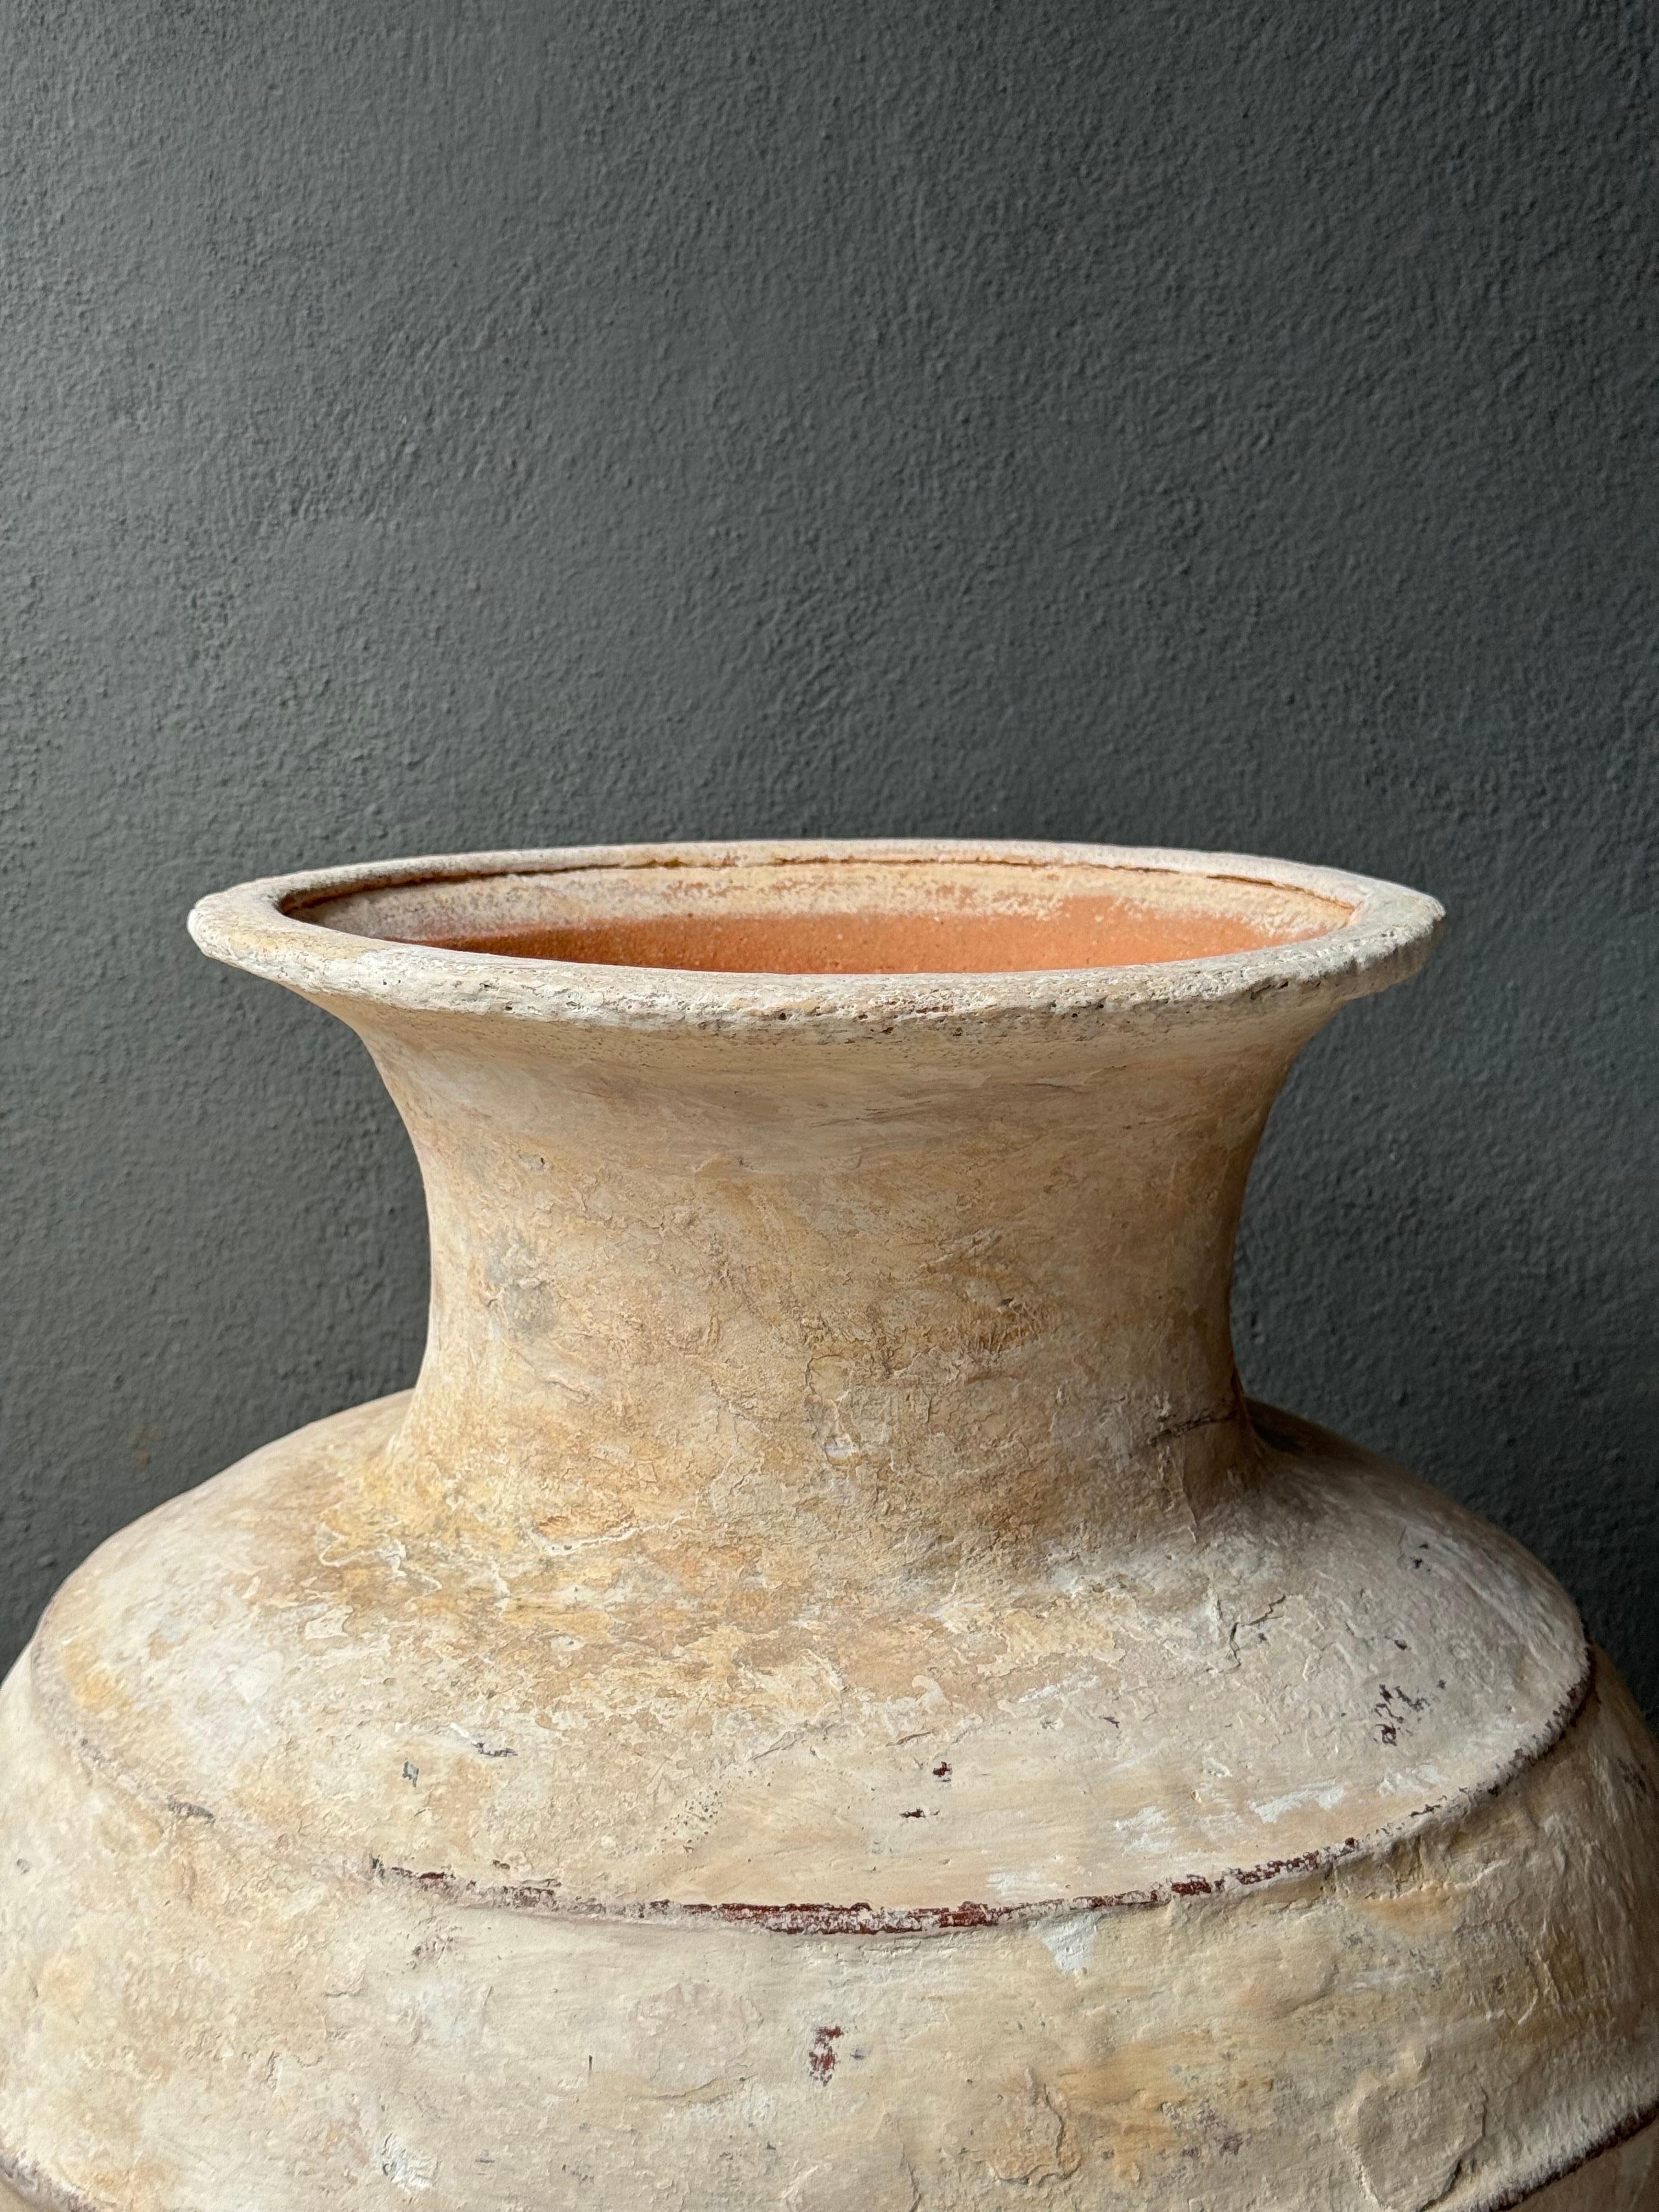 Ceramic water vessel from Central Yucatan, Mexico, early 20th century. The Mayan communities generally used white plaster on their terracotta jars in order to maintain the water at a cooler temperature. This technique not only helped insulate the